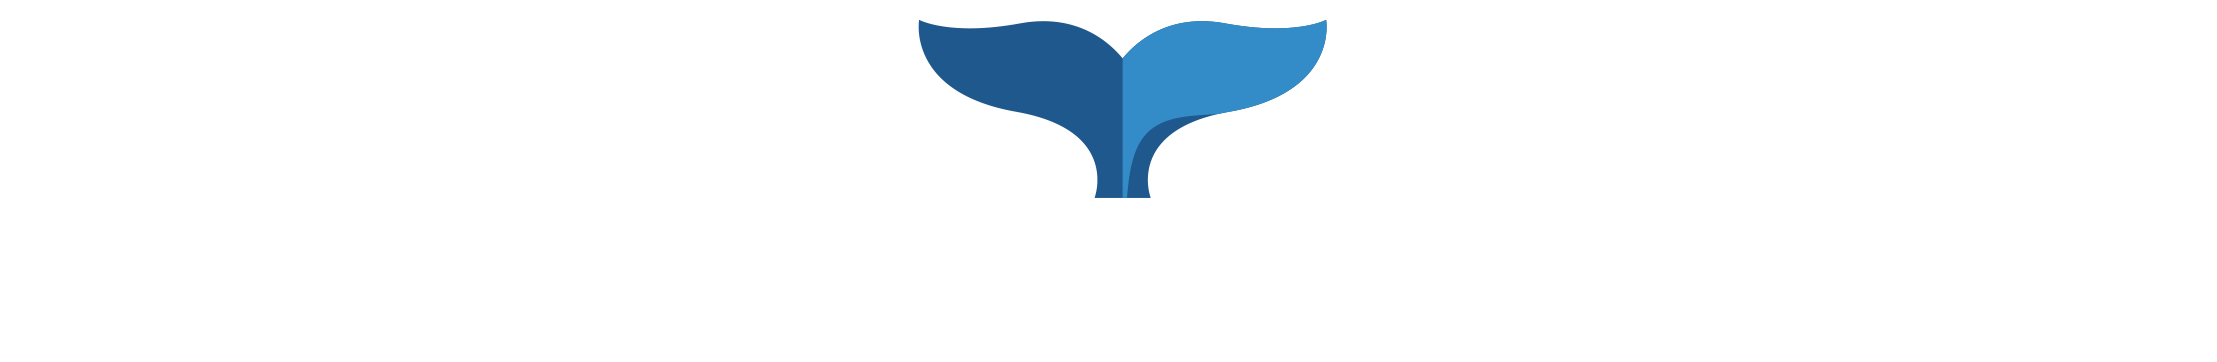 Horizontal color logo with tail, reversed